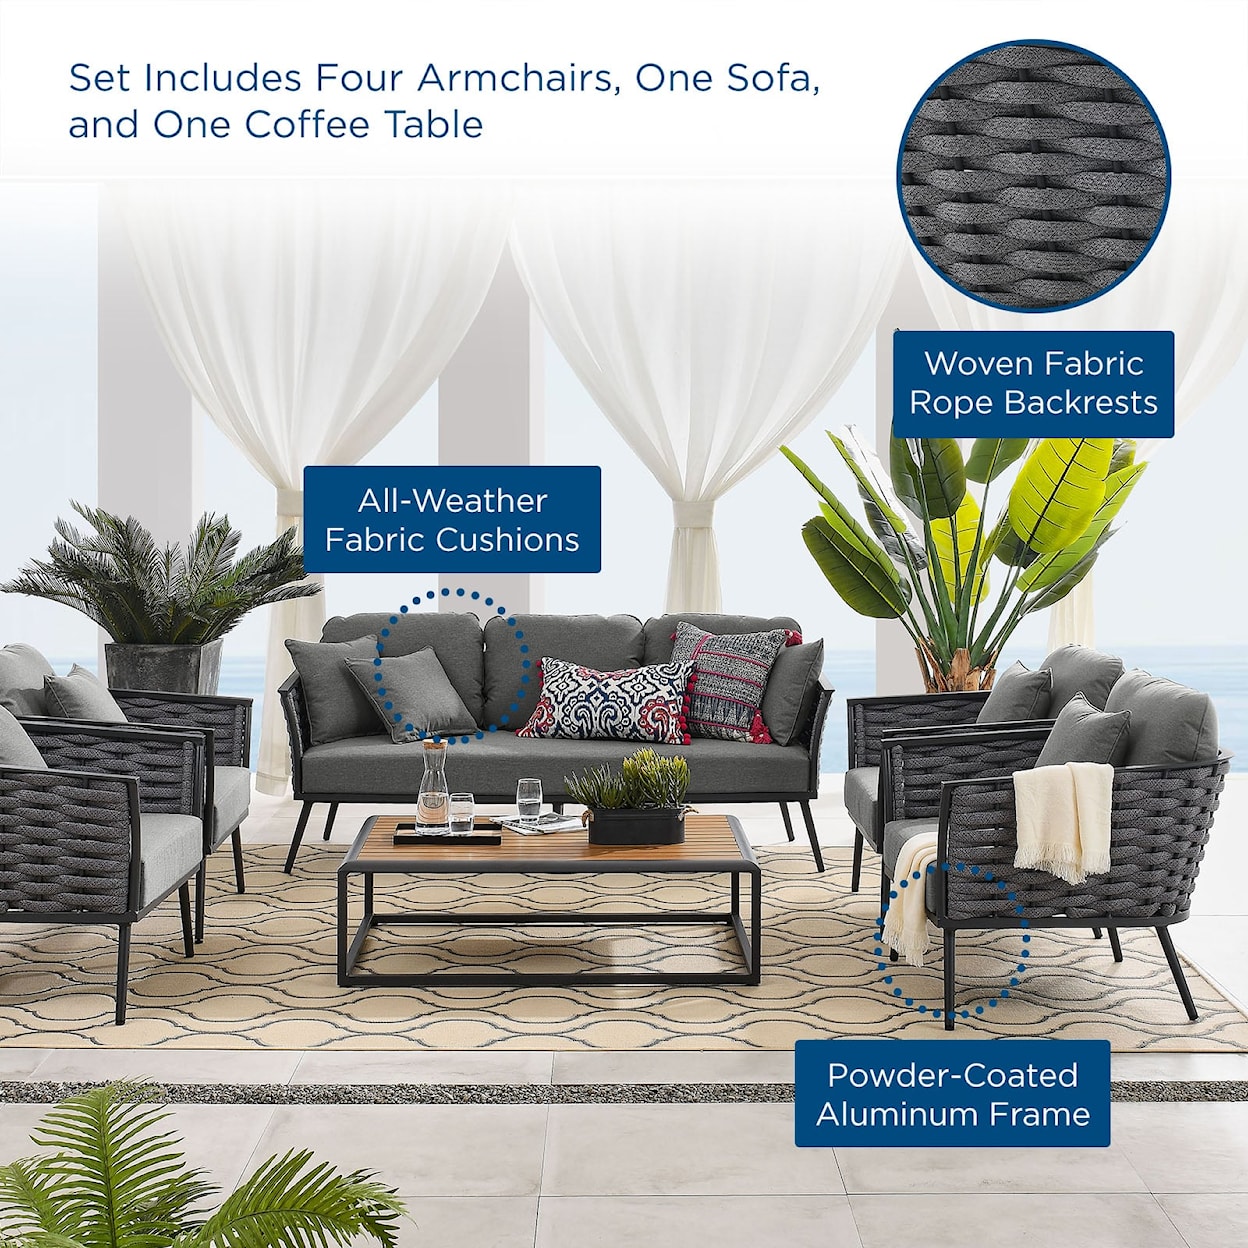 Modway Stance Stance 6 Piece Outdoor Sofa Set